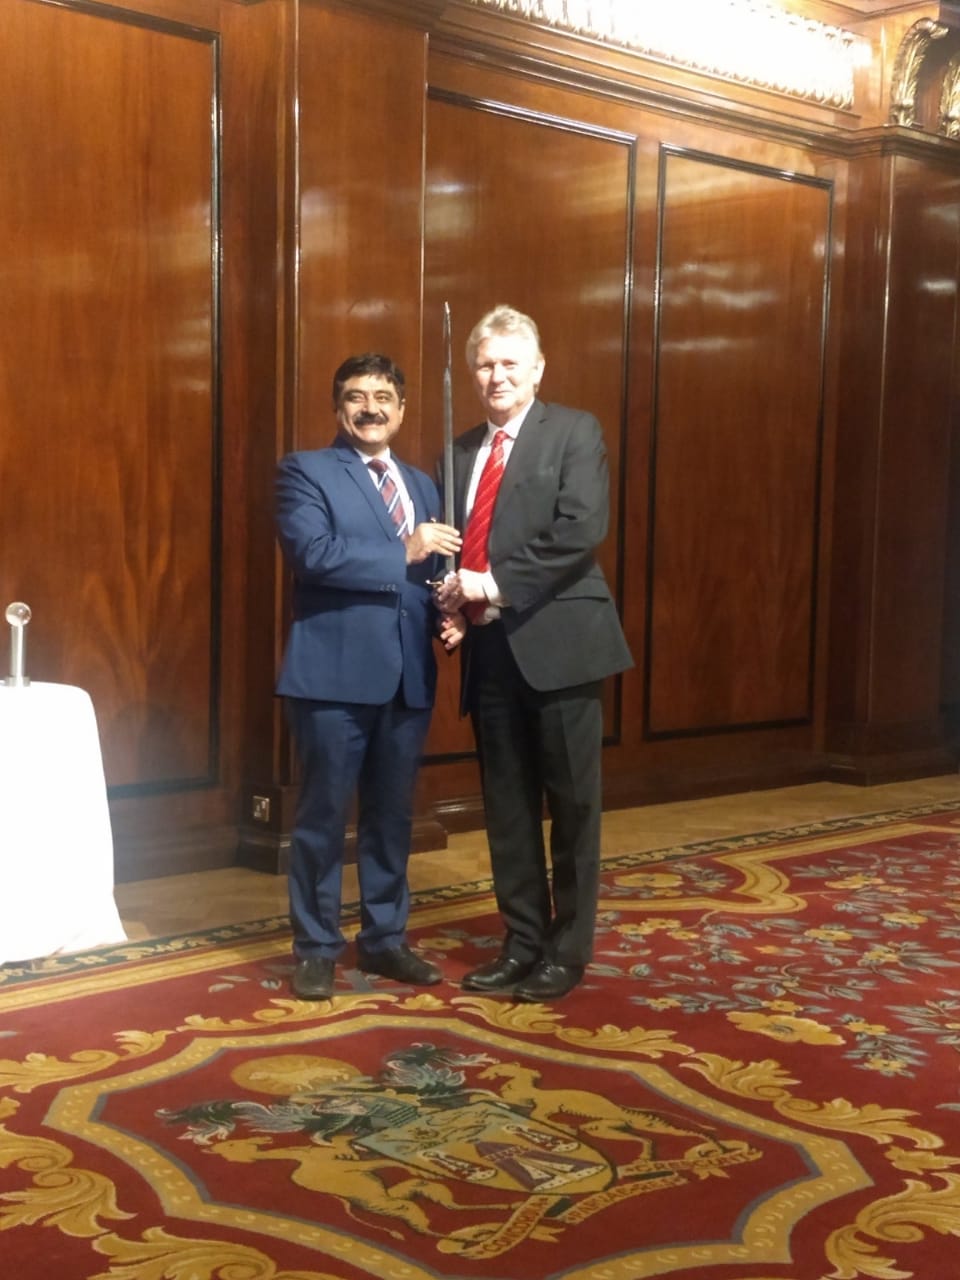 The British Safety Council, UK, Sword of Honour Award was received by Mr. Pramod Sapra, President, Shapoorji Pallonji Bumi Armada on behalf of the Company, from Mr. Mike Robinson, Chief Executive of the British Safety Council.